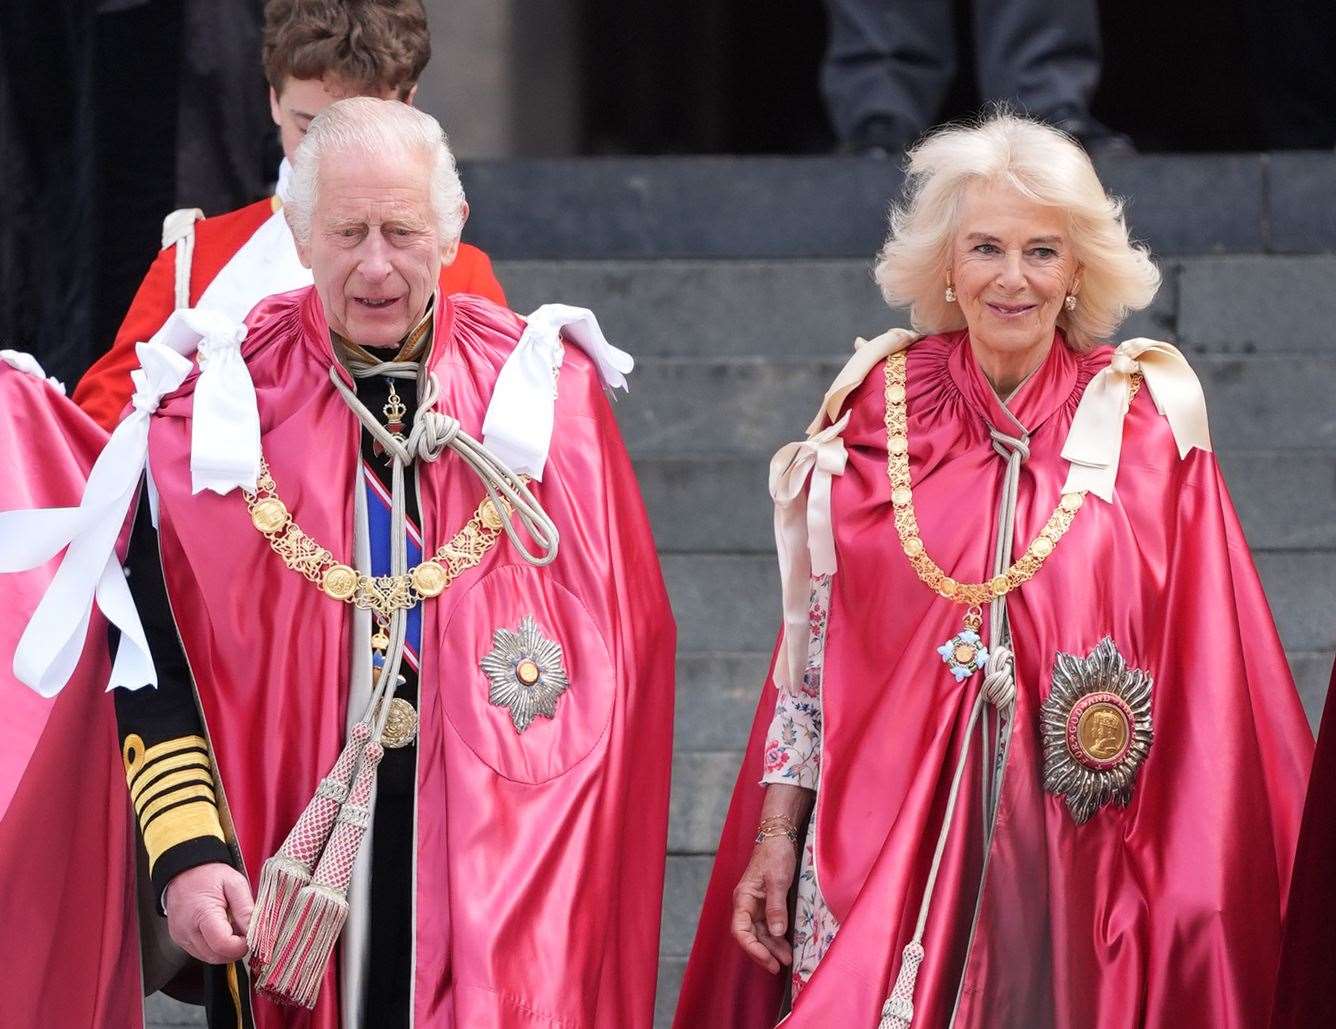 The King and Queen after a service for the Order of the British Empire at St Paul’s Cathedral this week (Jordan Pettitt/PA)